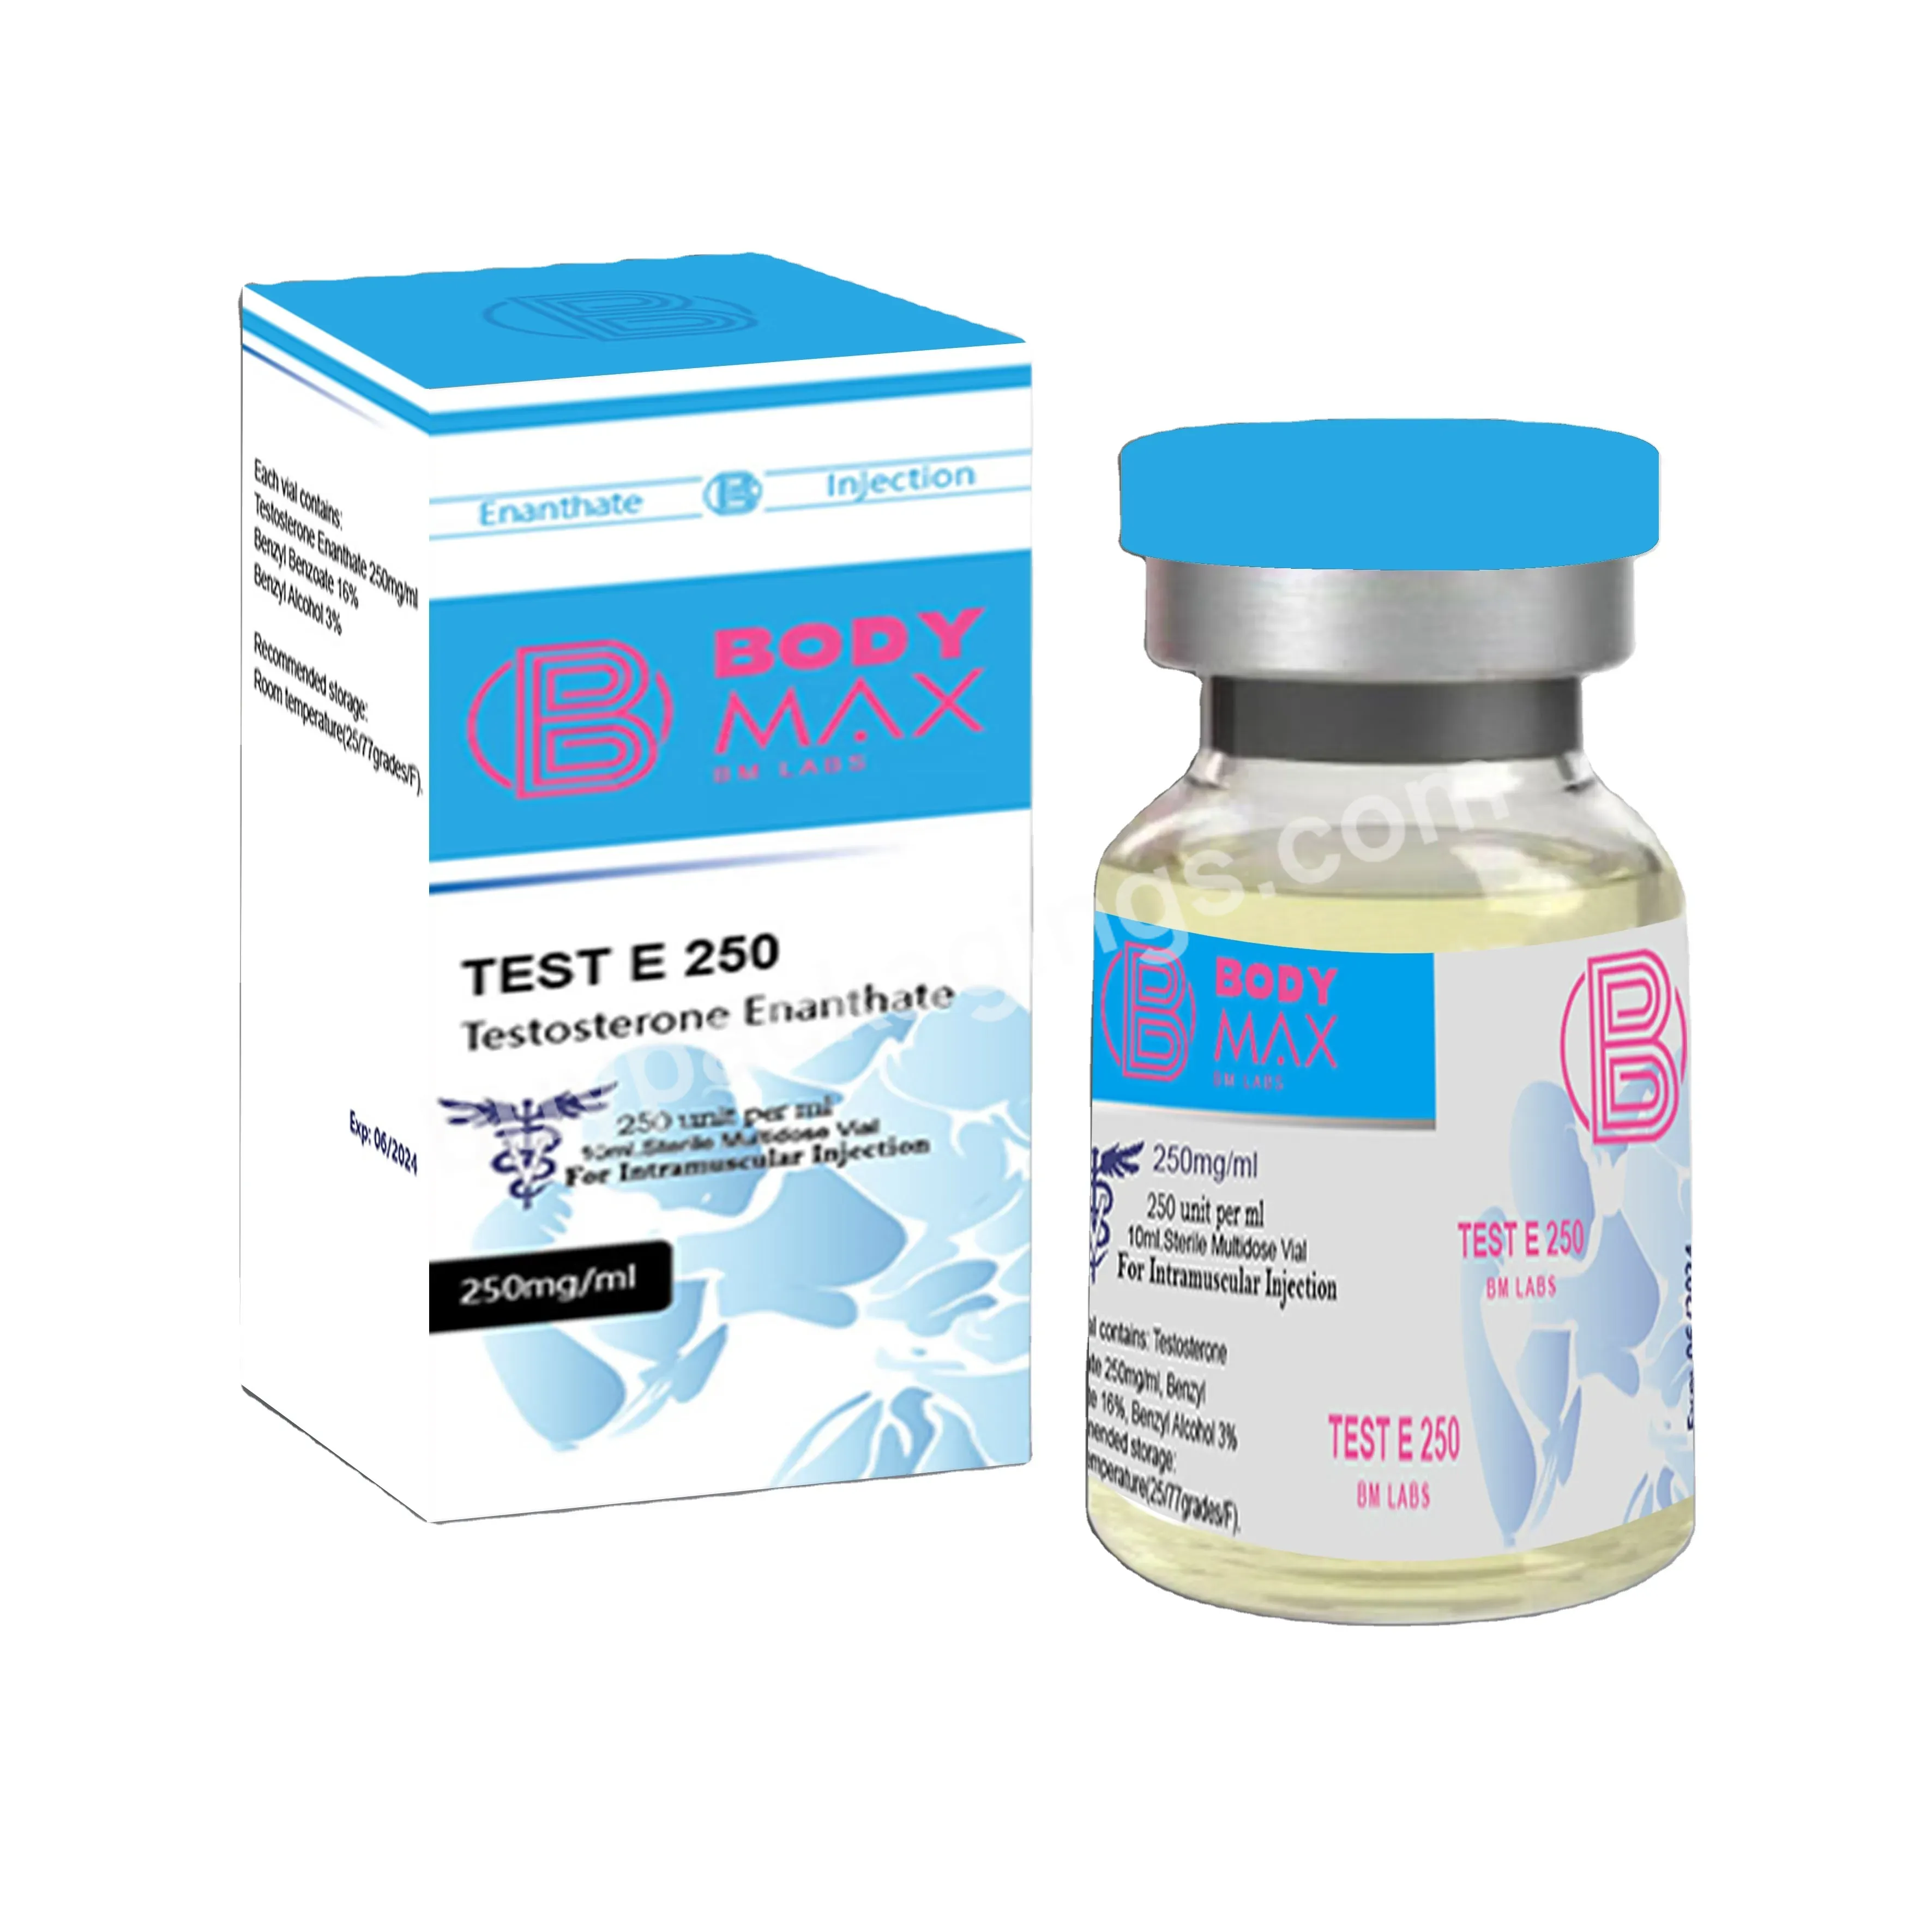 Private Label 5000iu Vial Hcg Human 10ml Vial Steroid Box And Labels - Buy 1.5ml 2ml 4ml Sample Vial With Labels,10ml Vial Steroid Box,1.5ml Autosampler Vial With Labels.